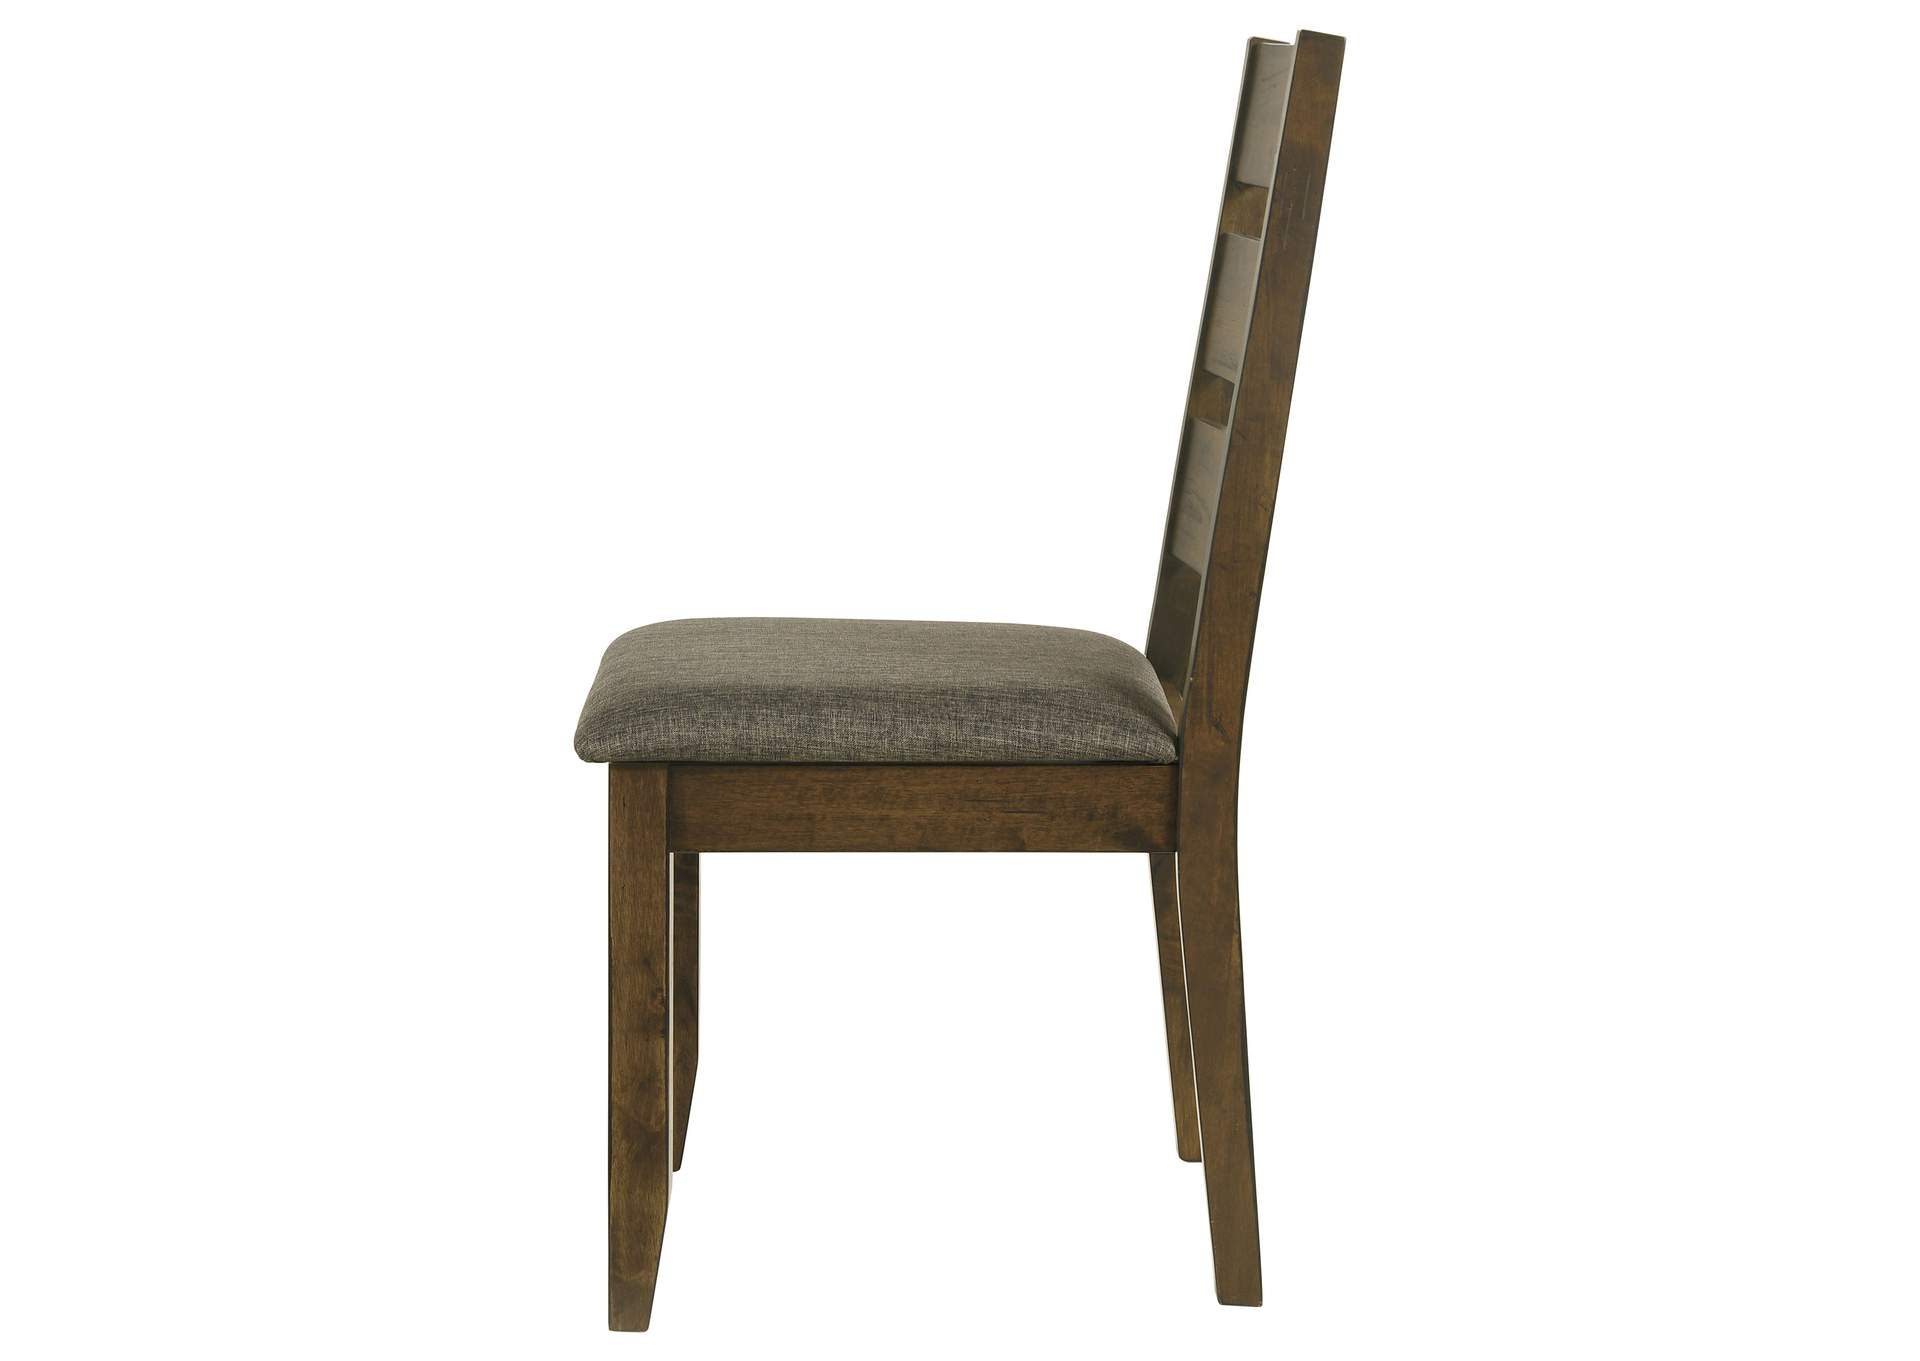 Alston Ladder Back Dining Side Chairs Knotty Nutmeg and Grey (Set of 2),Coaster Furniture